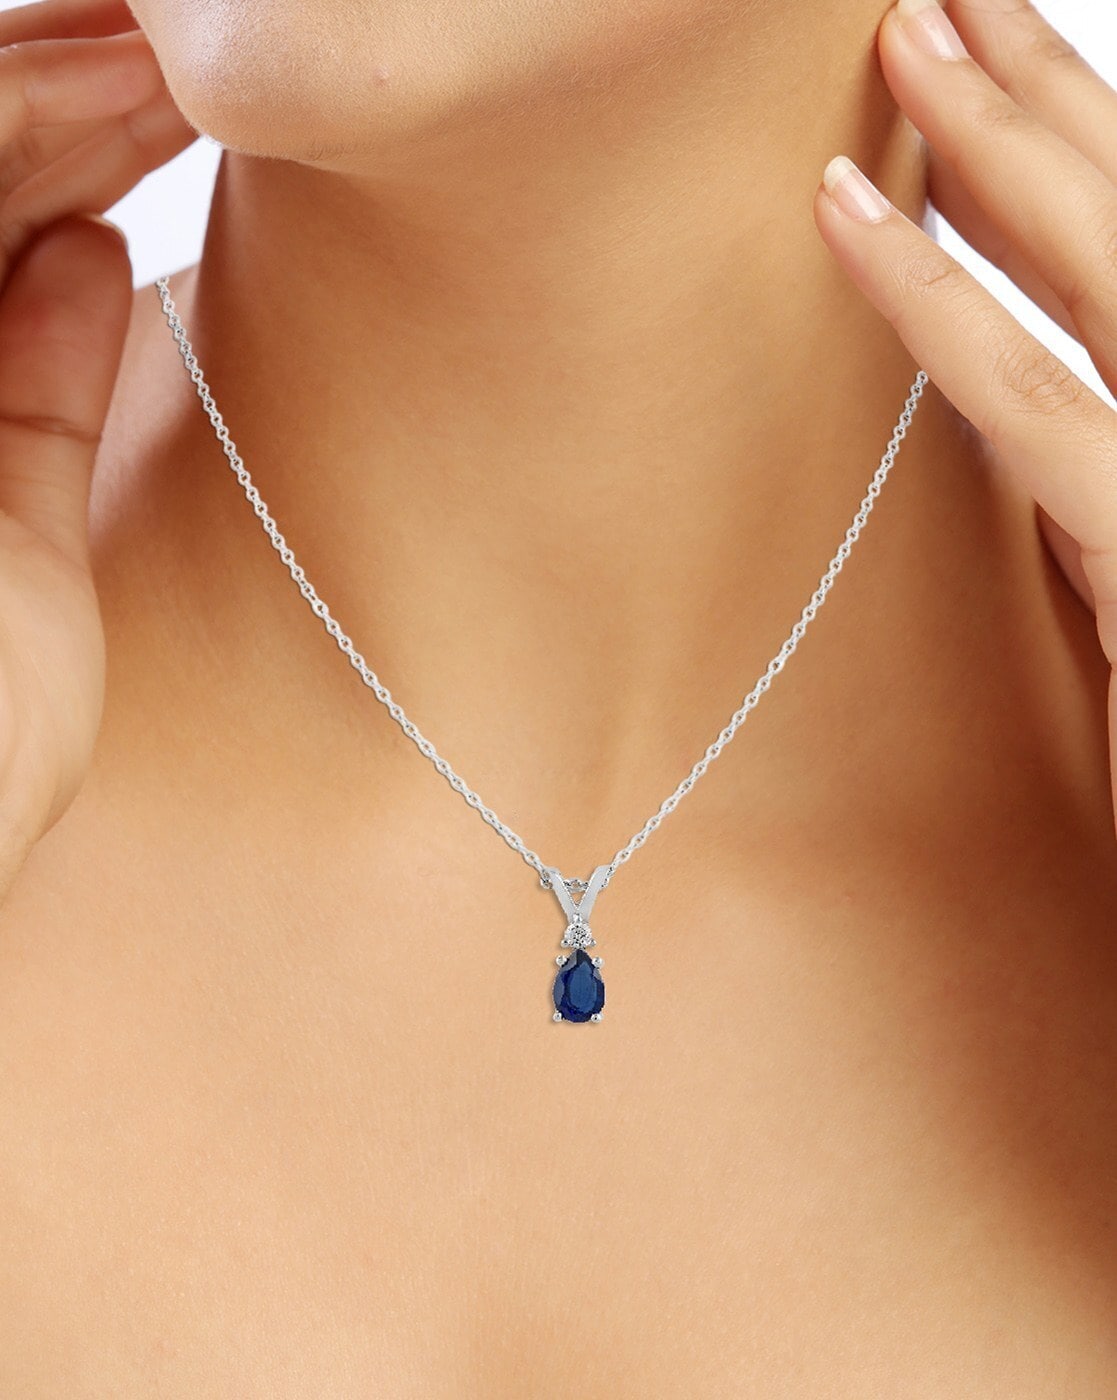 Blue Sapphire Necklace 925 Sterling Silver, Crystal Necklace, Layered  Necklace, Birthday Gift, Everyday Jewelry, Simple Necklace, Minimalist -  Etsy